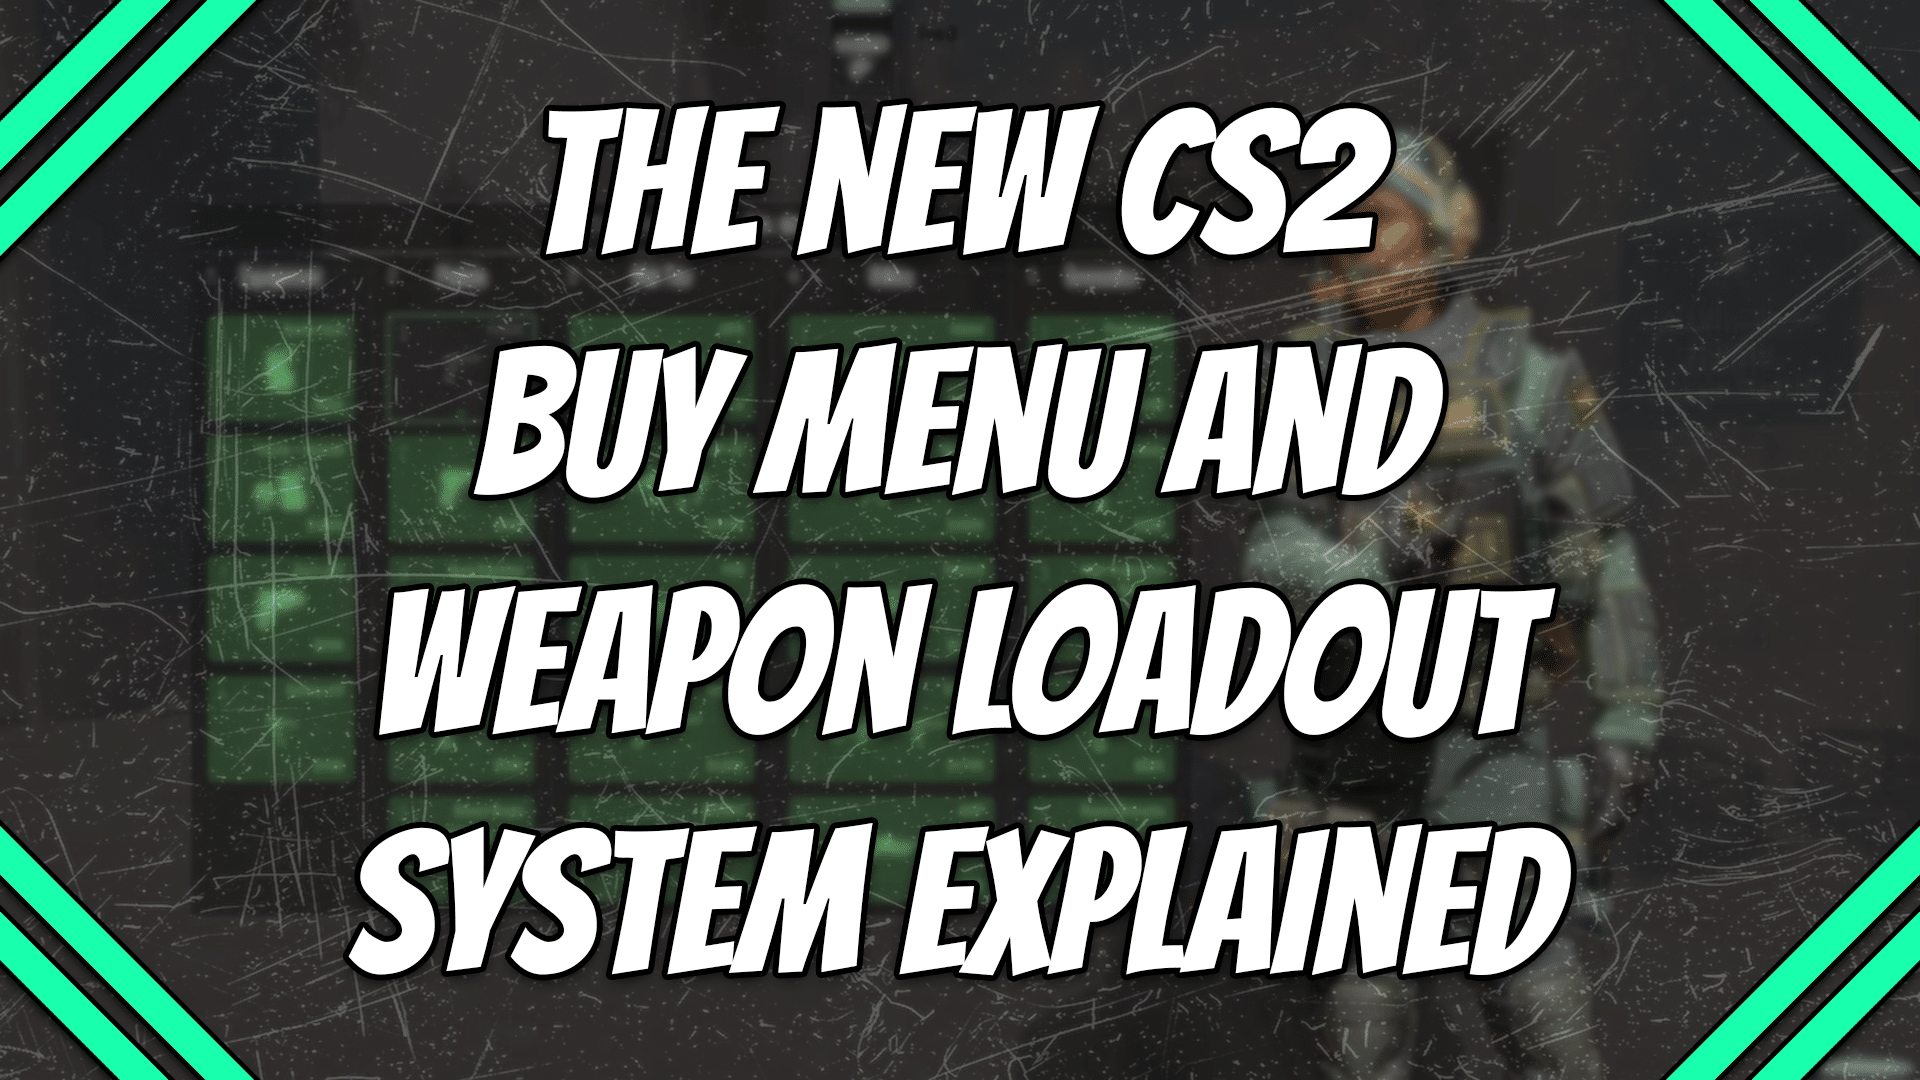 the new cs2 buy menu and weapon loadout explained title card